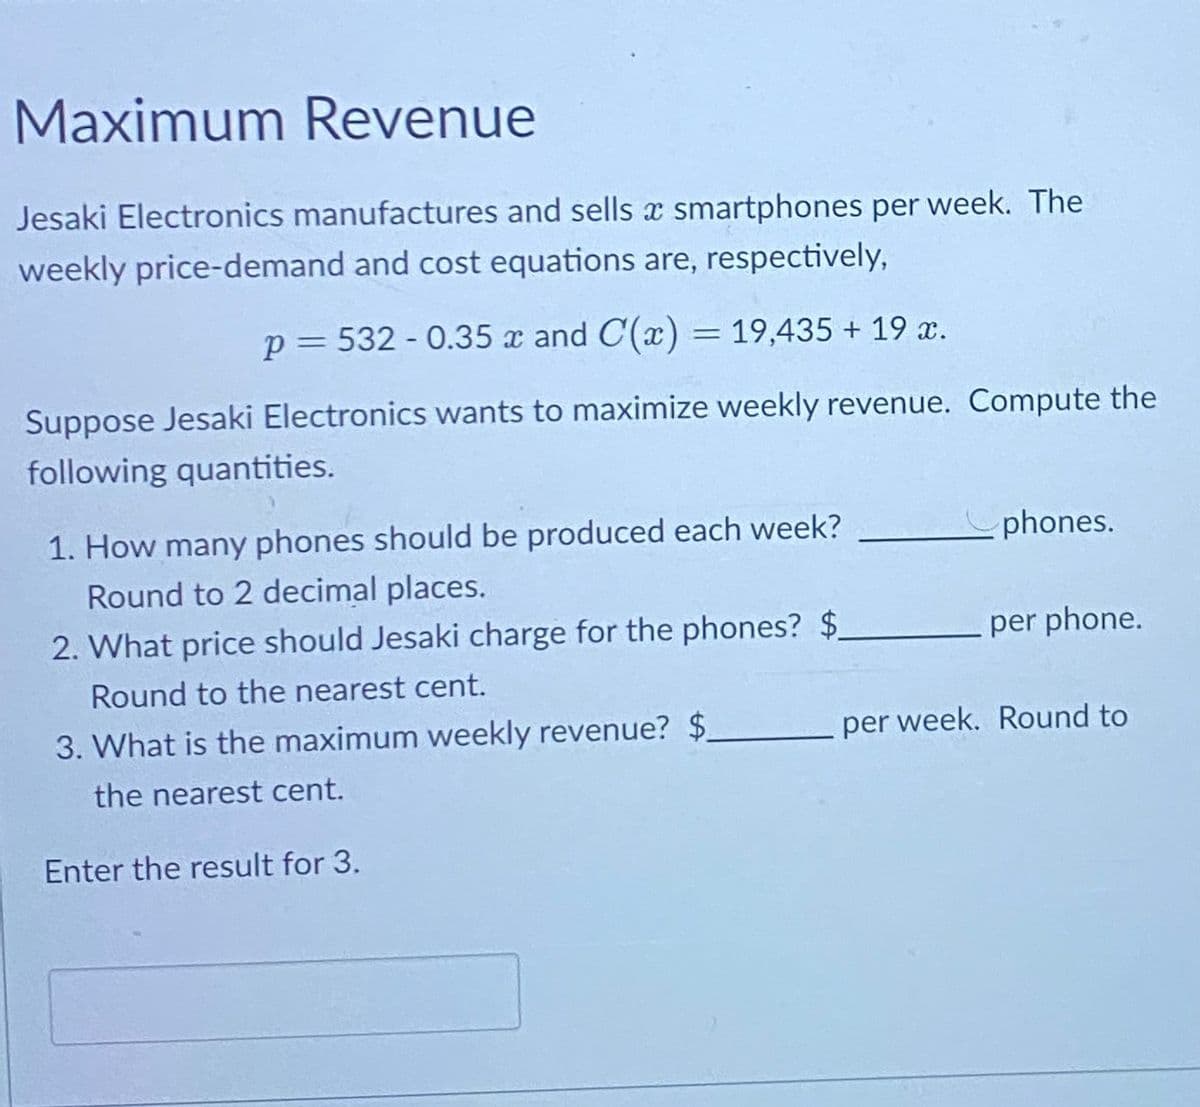 Maximum Revenue
Jesaki Electronics manufactures and sells a smartphones per week. The
weekly price-demand and cost equations are, respectively,
p = 532 -0.35 x and C(x) = 19,435 + 19 x.
Suppose Jesaki Electronics wants to maximize weekly revenue. Compute the
following quantities.
1. How many phones should be produced each week?
Round to 2 decimal places.
2. What price should Jesaki charge for the phones? $
Round to the nearest cent.
3. What is the maximum weekly revenue? $_
the nearest cent.
Enter the result for 3.
phones.
per phone.
per week. Round to